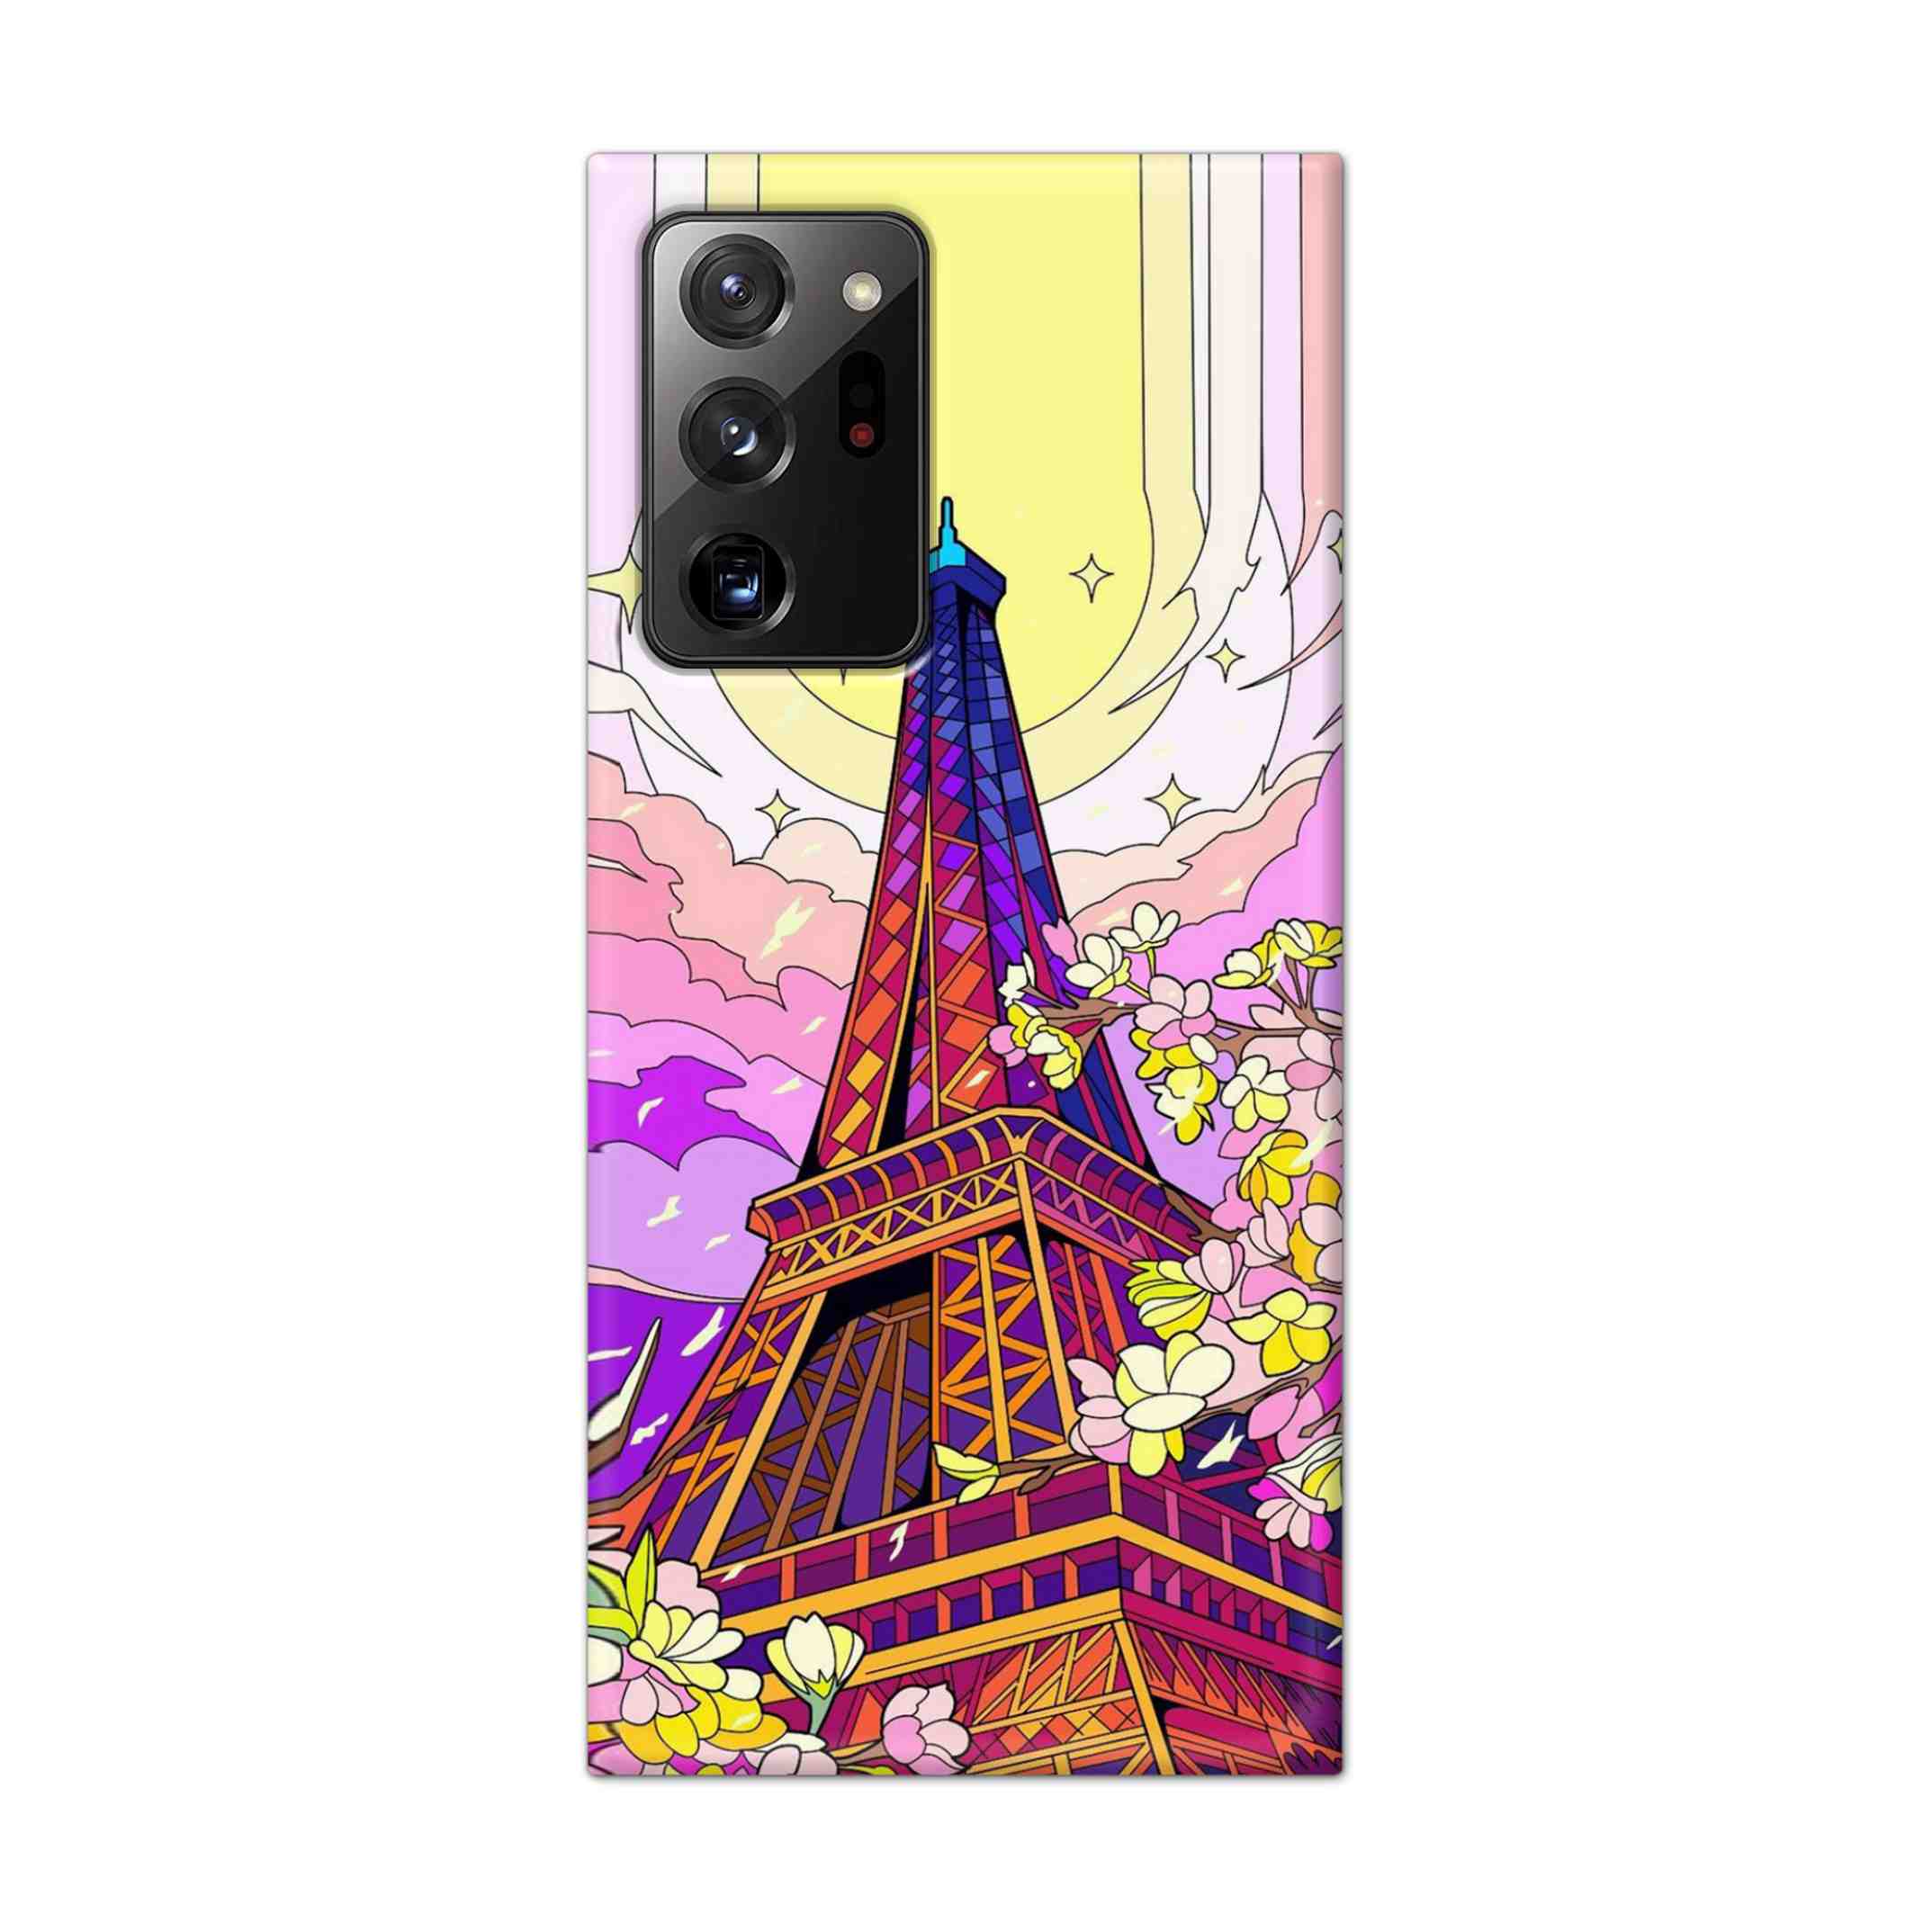 Buy Eiffel Tower Hard Back Mobile Phone Case Cover For Samsung Galaxy Note 20 Ultra Online